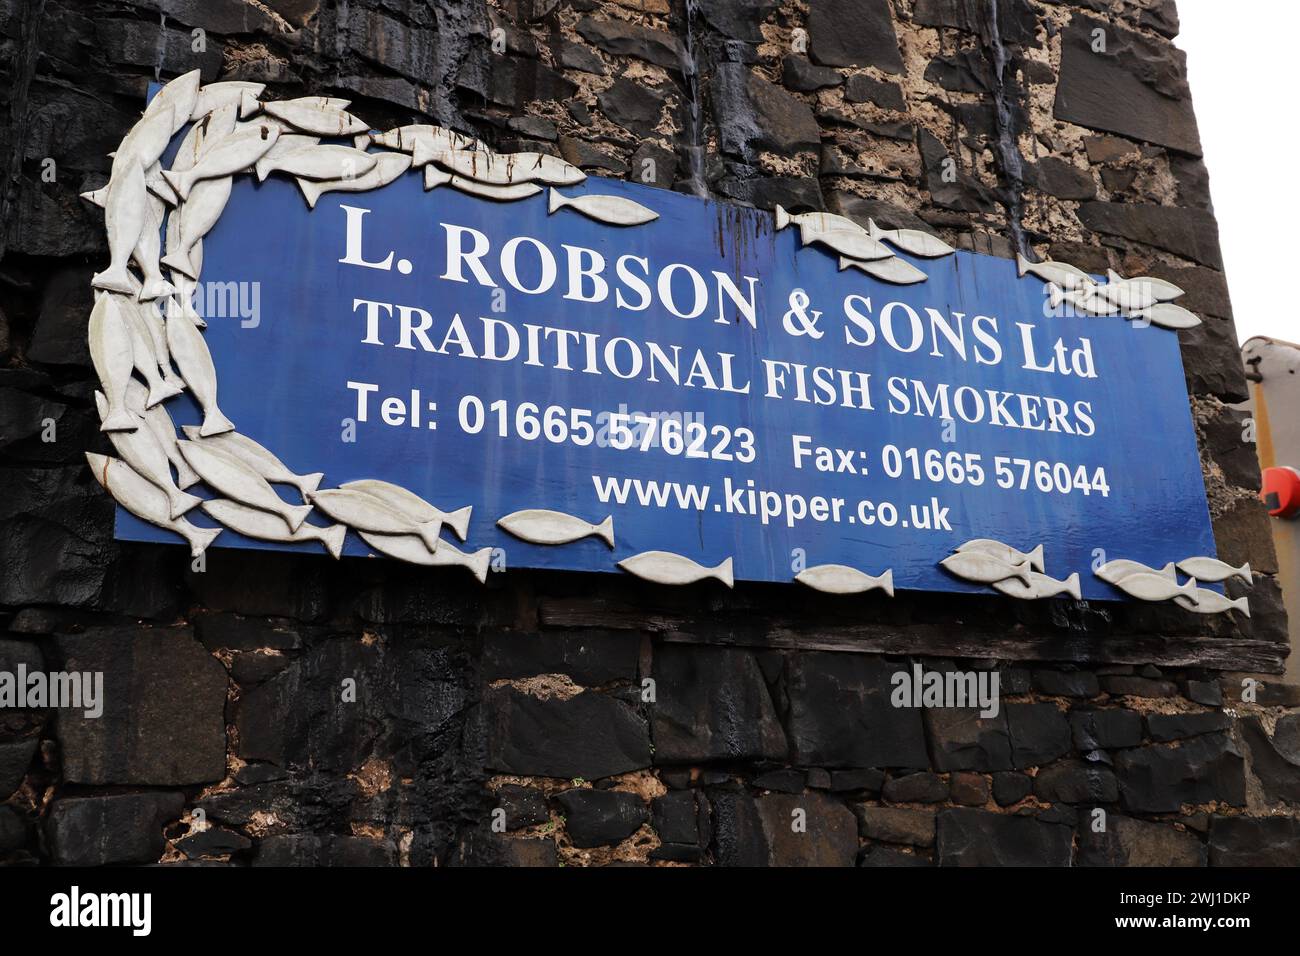 Sign outside Craster Fish Smoking firm, L. Robson & Sons Ltd, Craster, Northumberland Stock Photo